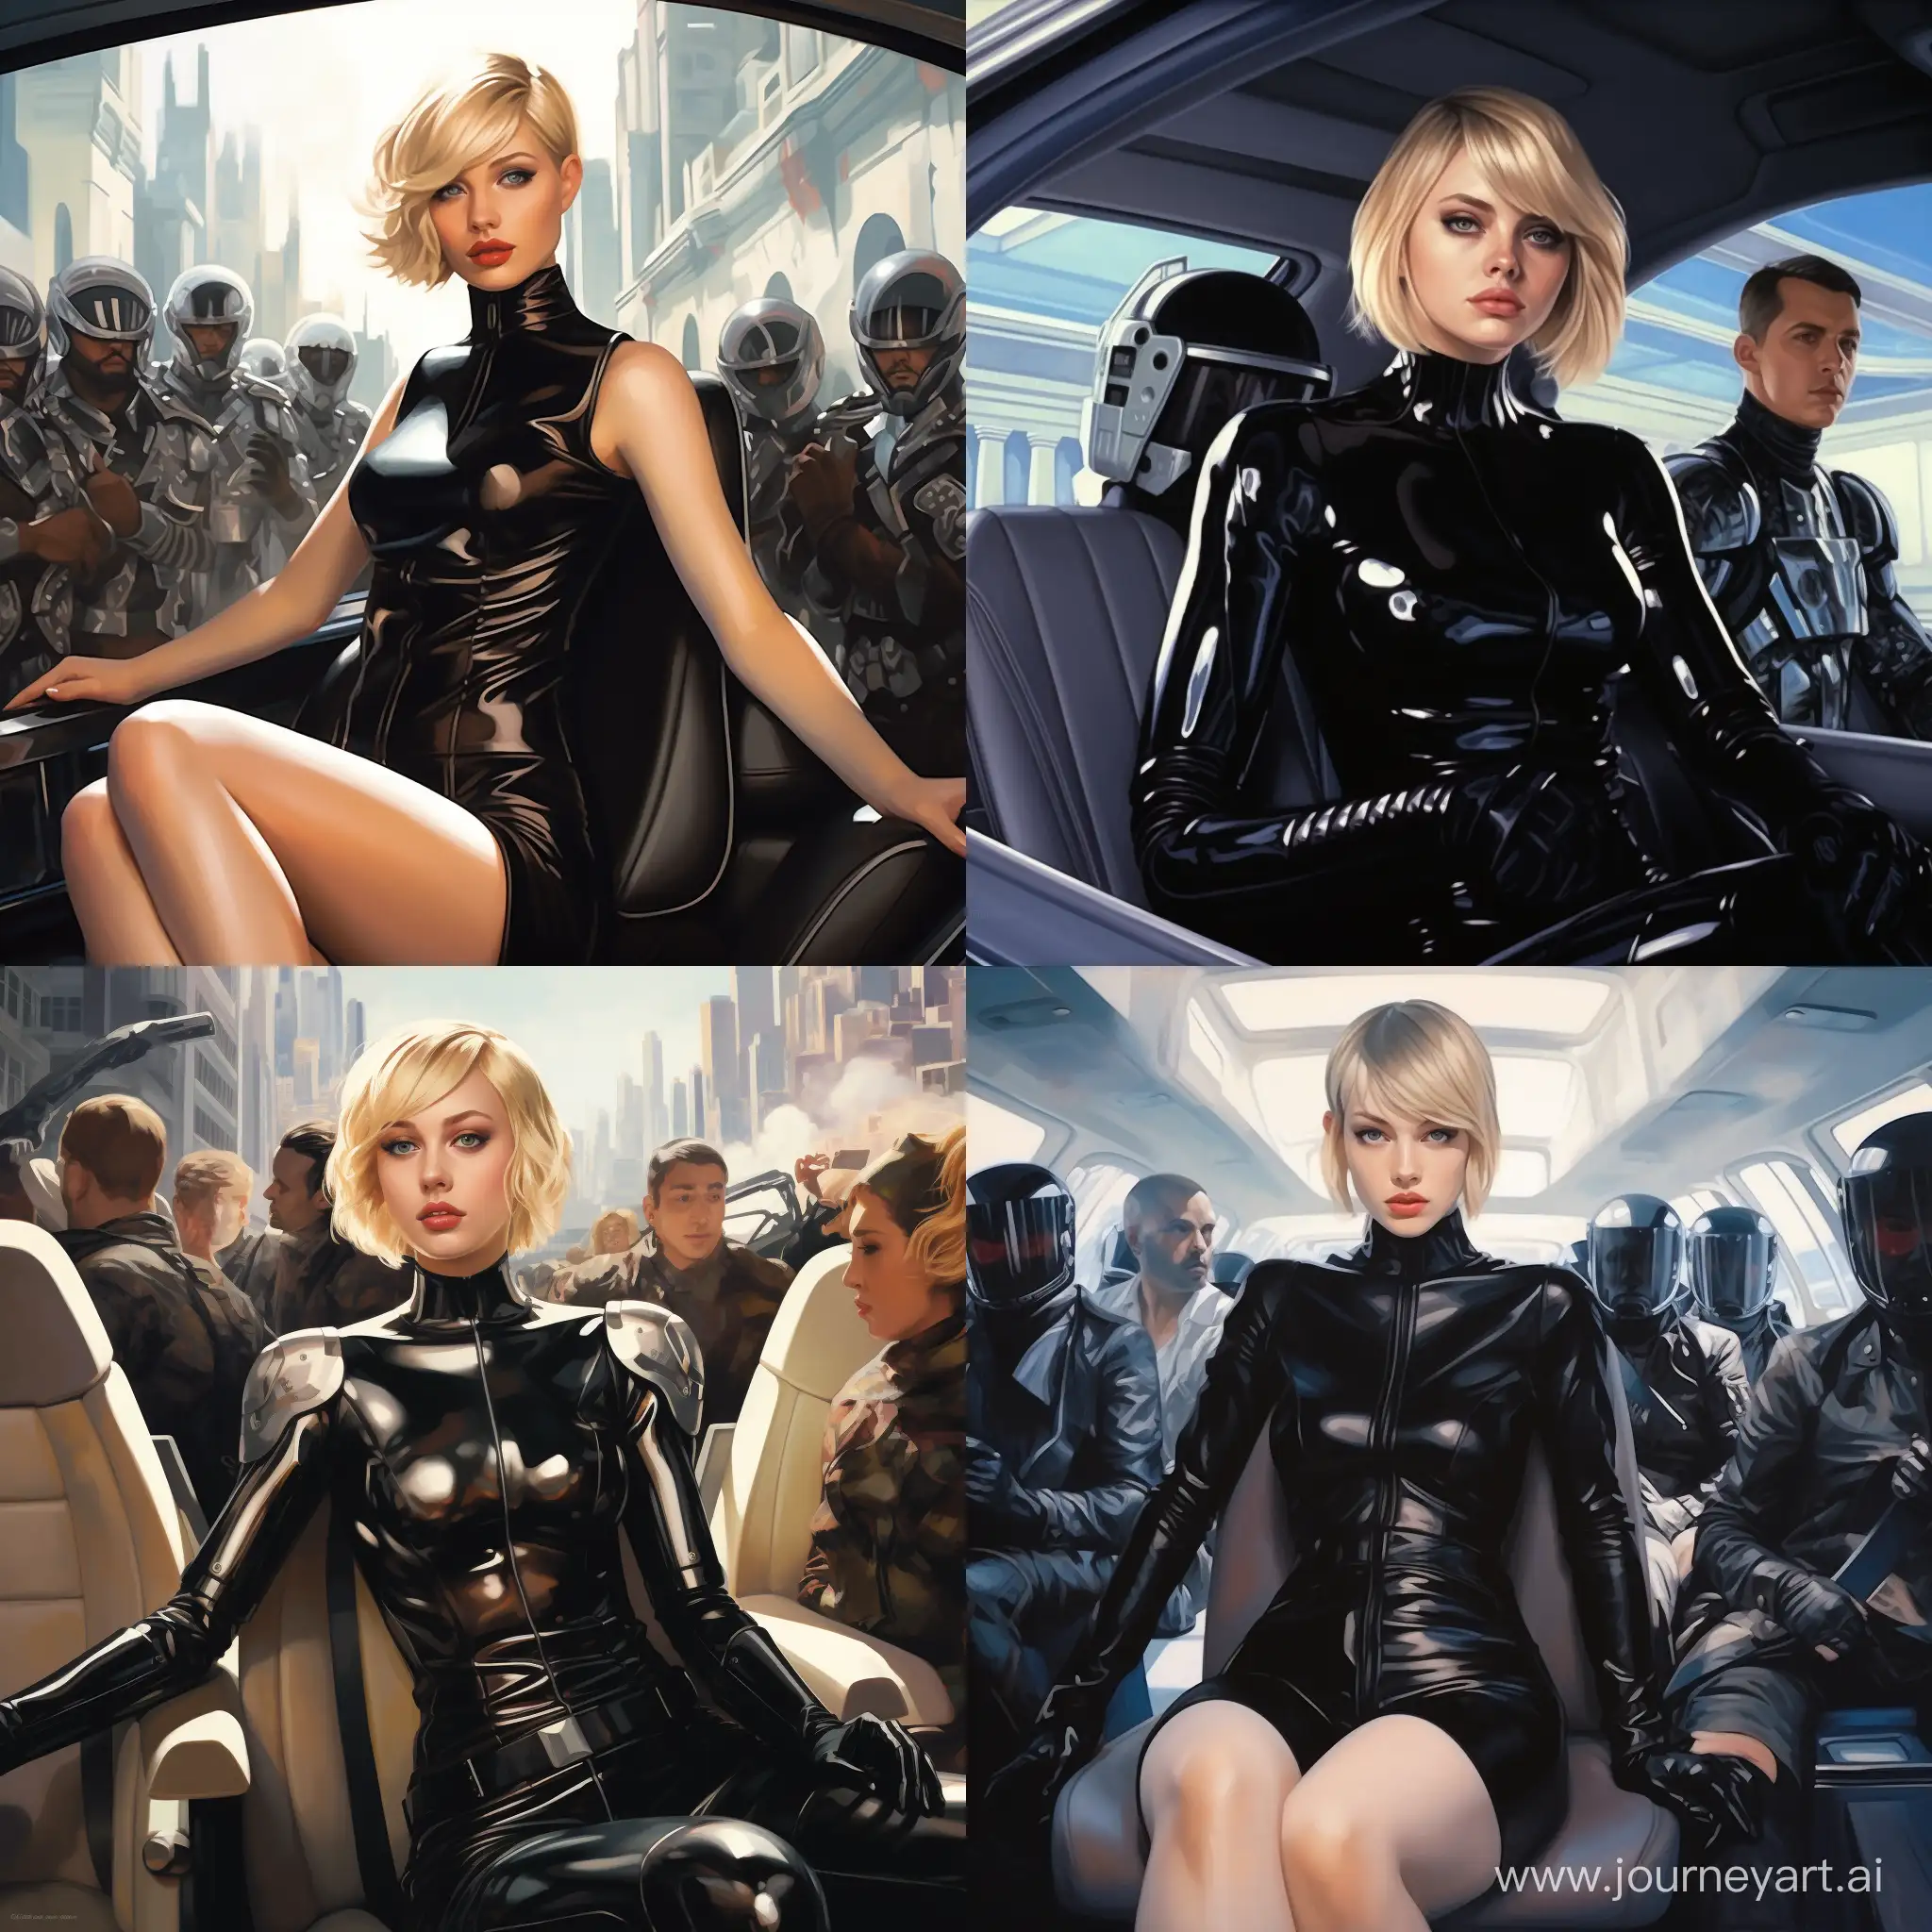 painting of young blonde woman with short hair in an epic black uniform in the back seat of a black government limousine accompanied by an escort of motorcyclists in white gloves on the street of a futuristic metropolis